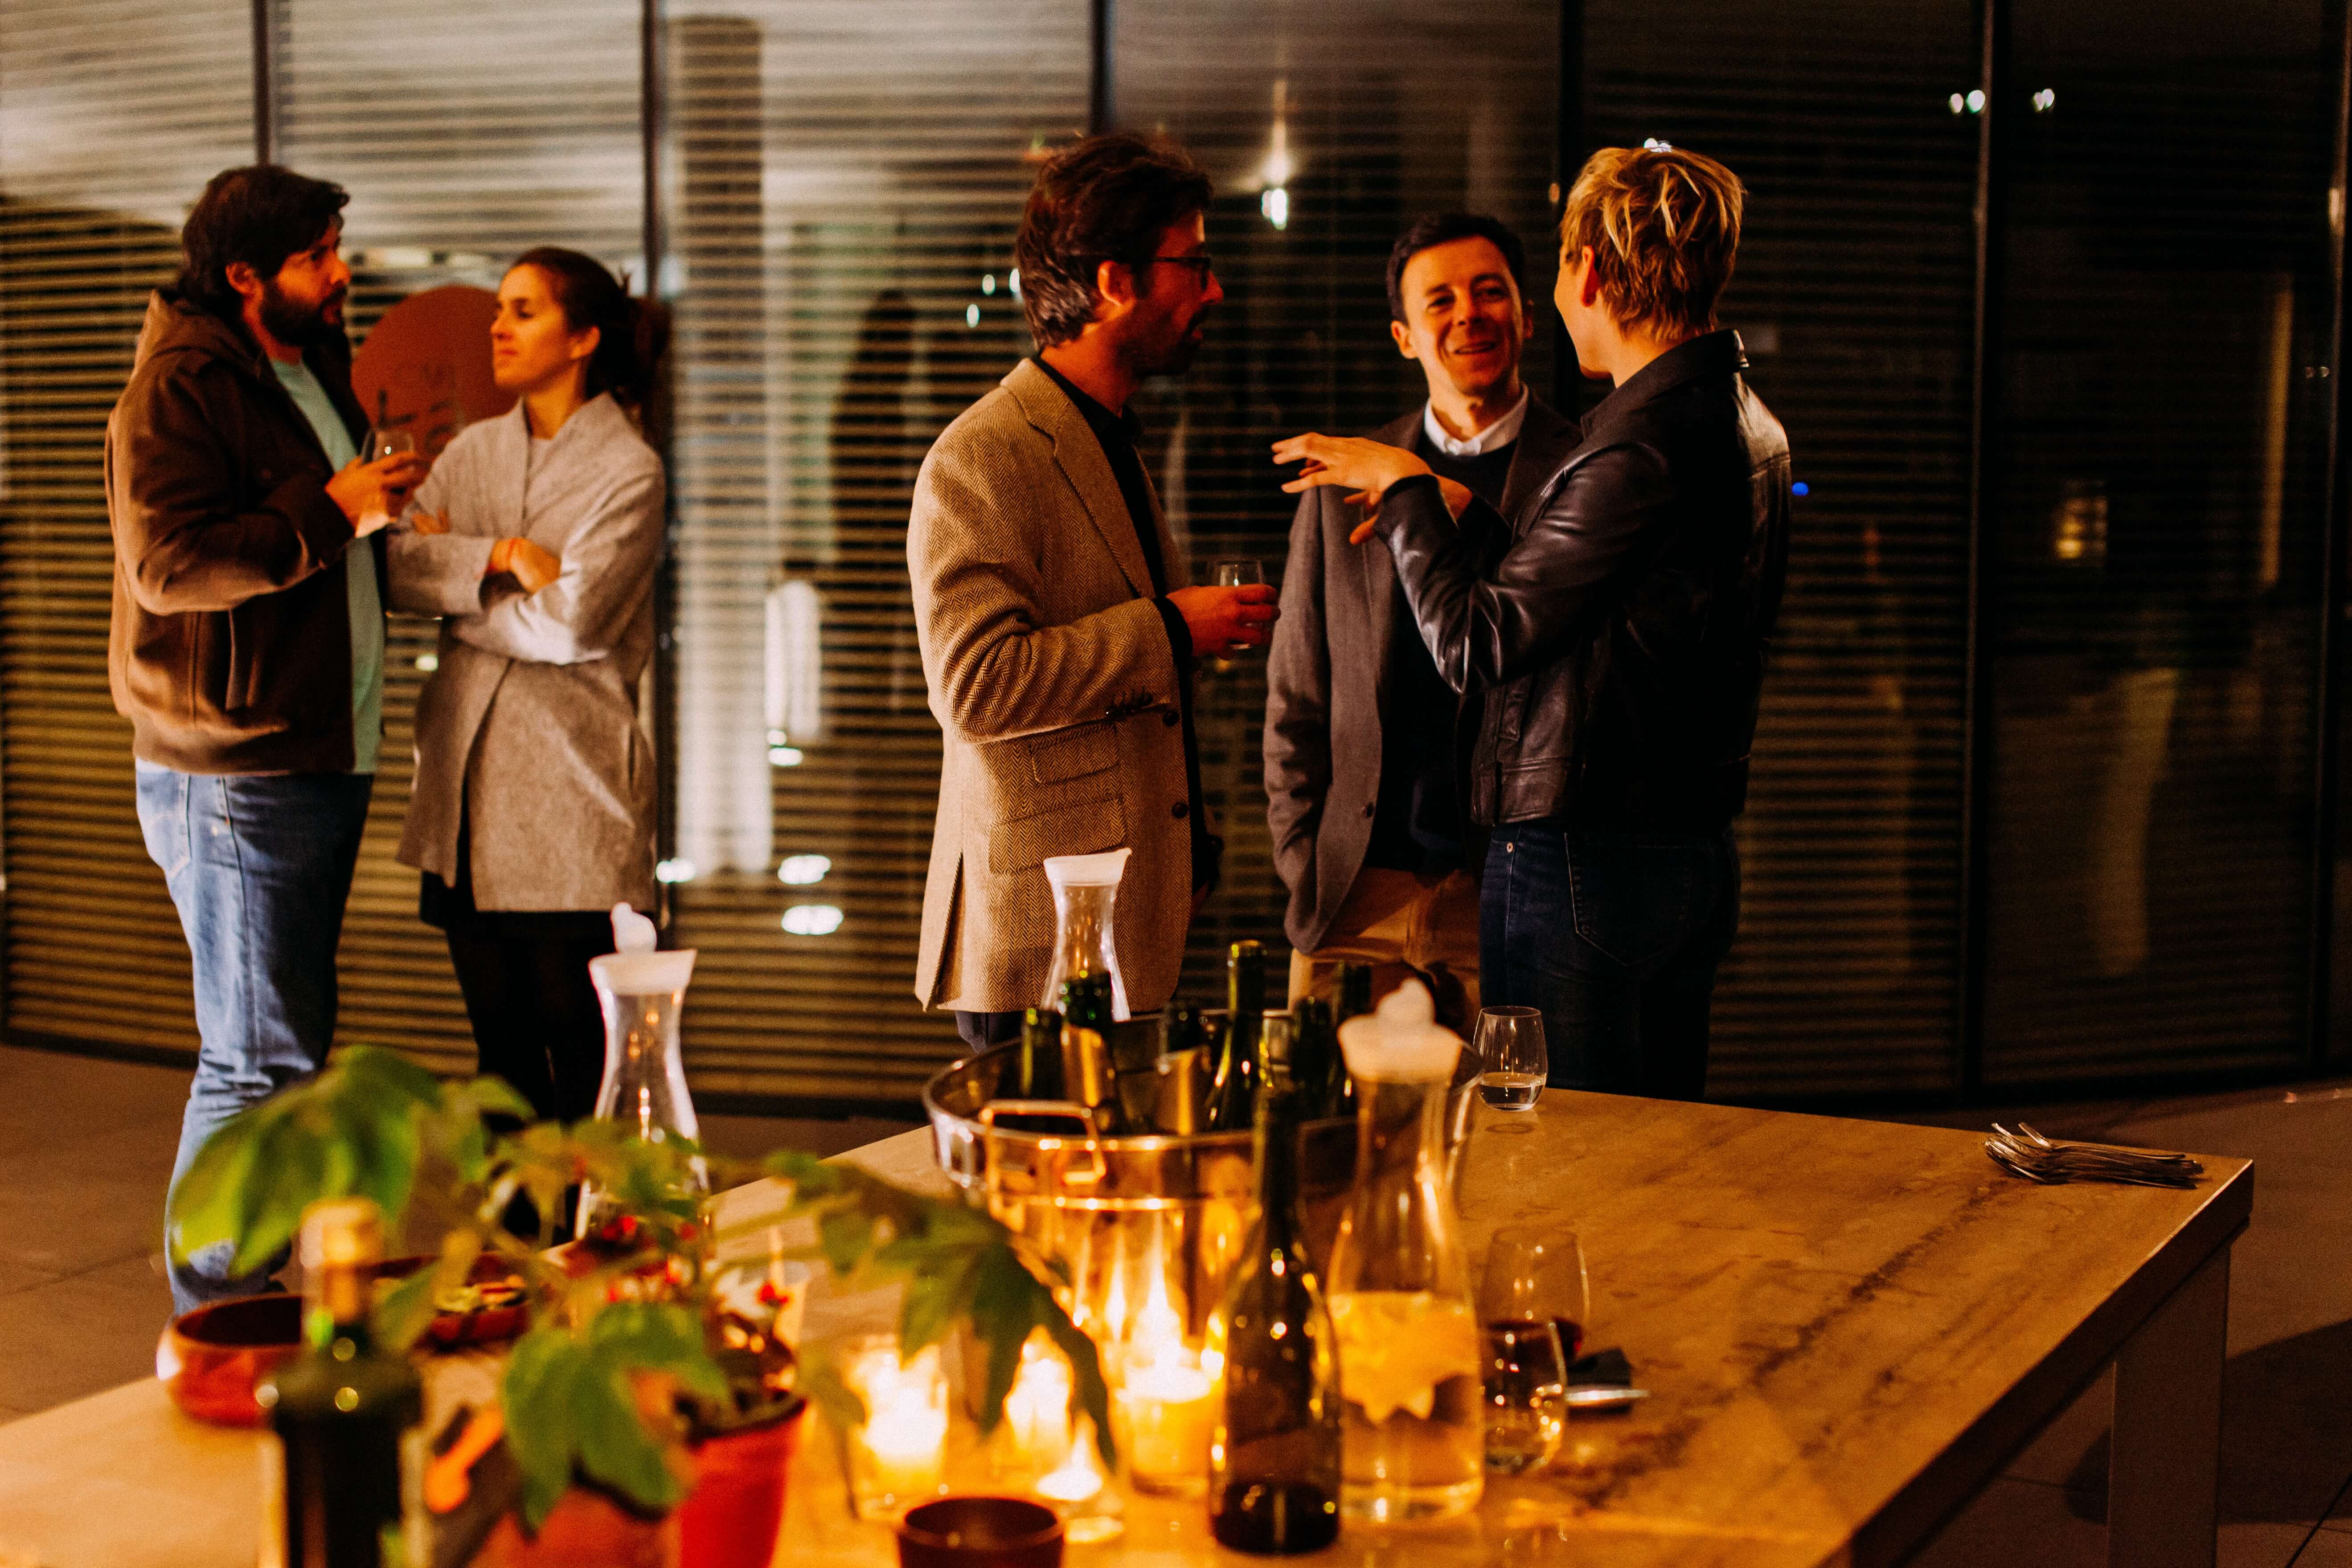 Five people in business casual clothing mingling at an event